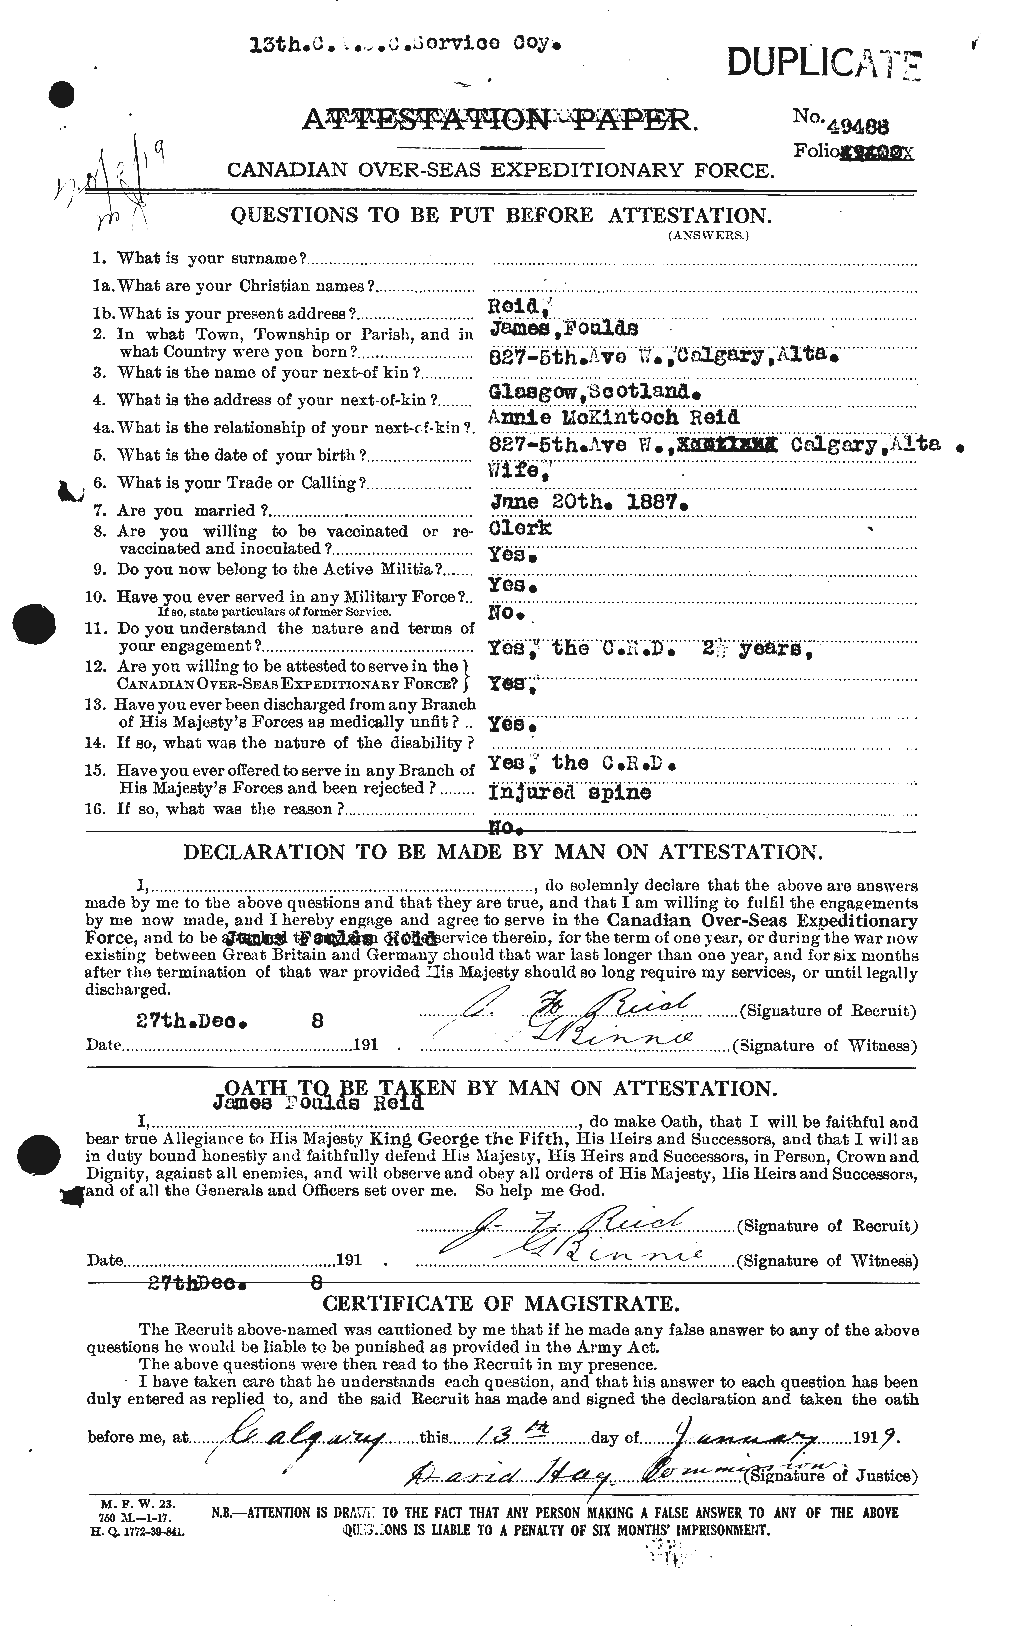 Personnel Records of the First World War - CEF 598710a